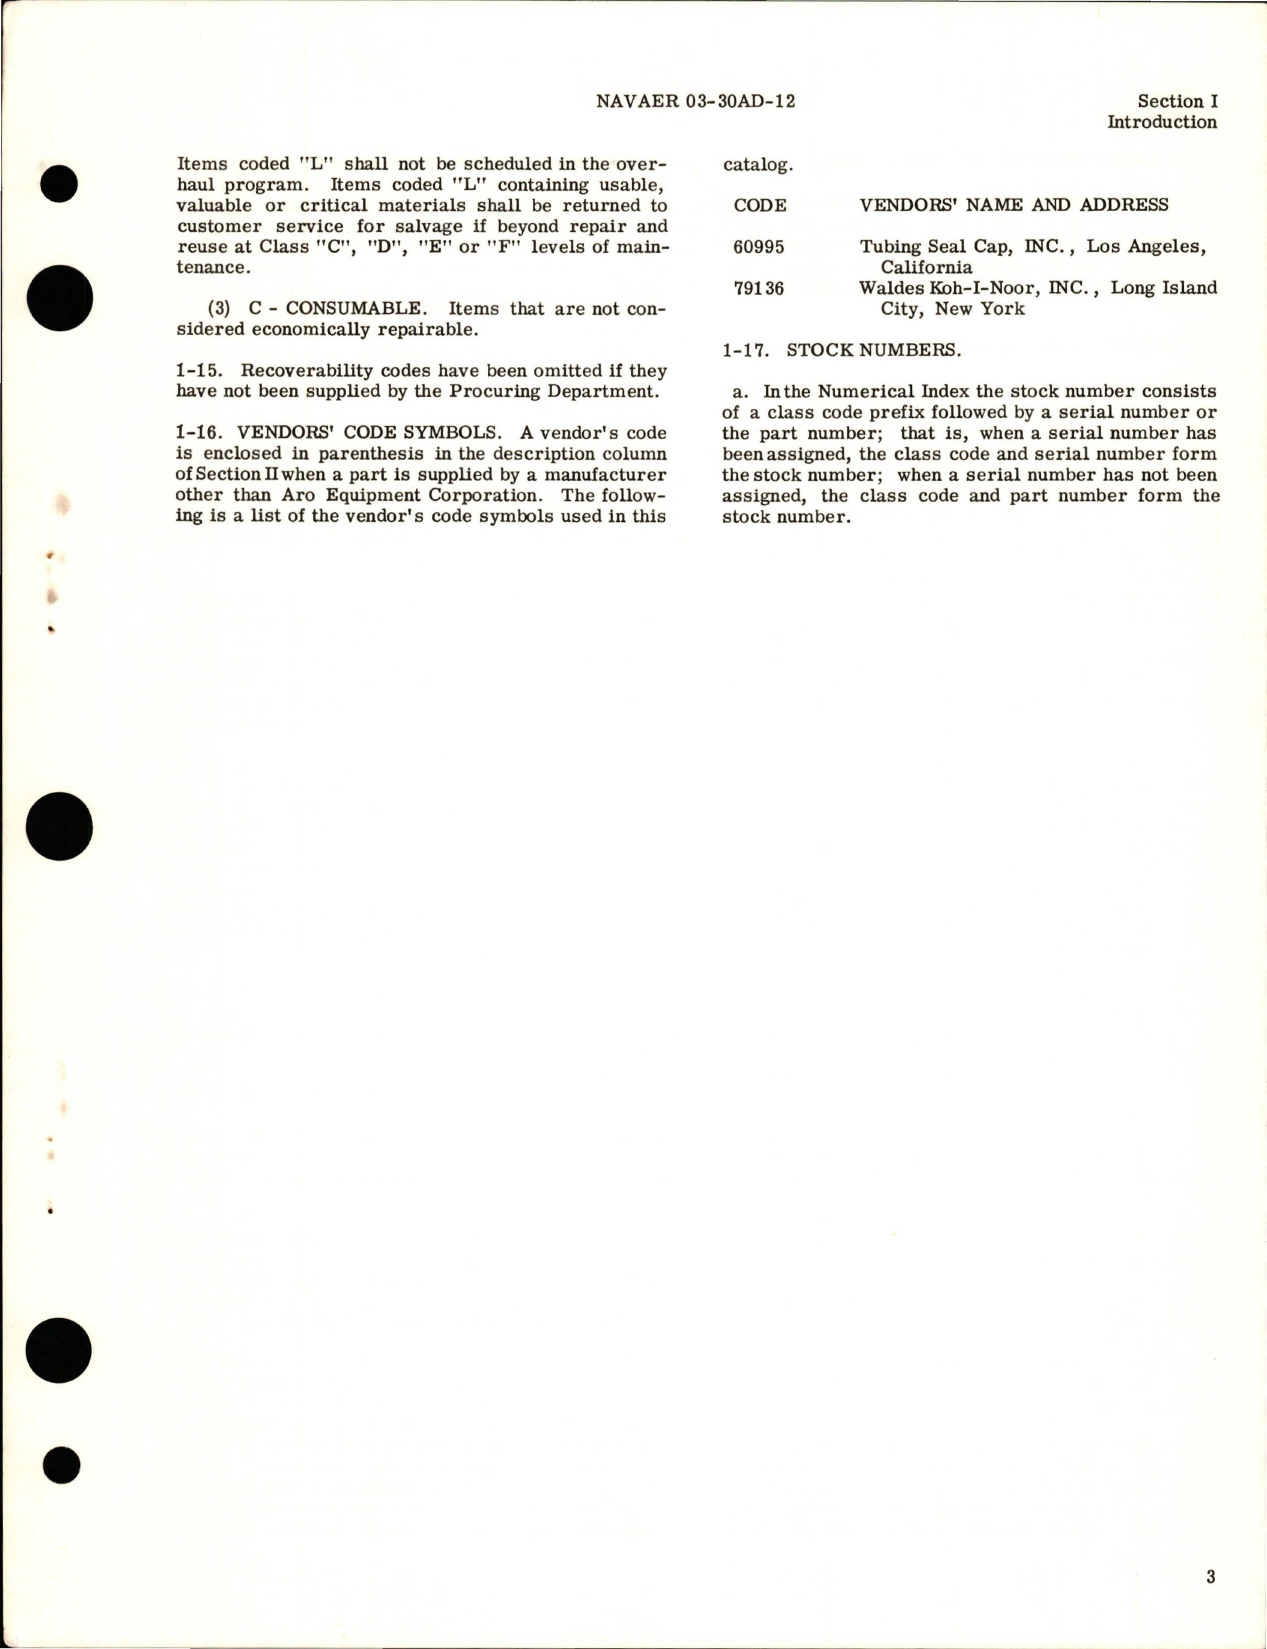 Sample page 5 from AirCorps Library document: Illustrated Parts Breakdown for Anti-G Suit Valve - Part 12800 